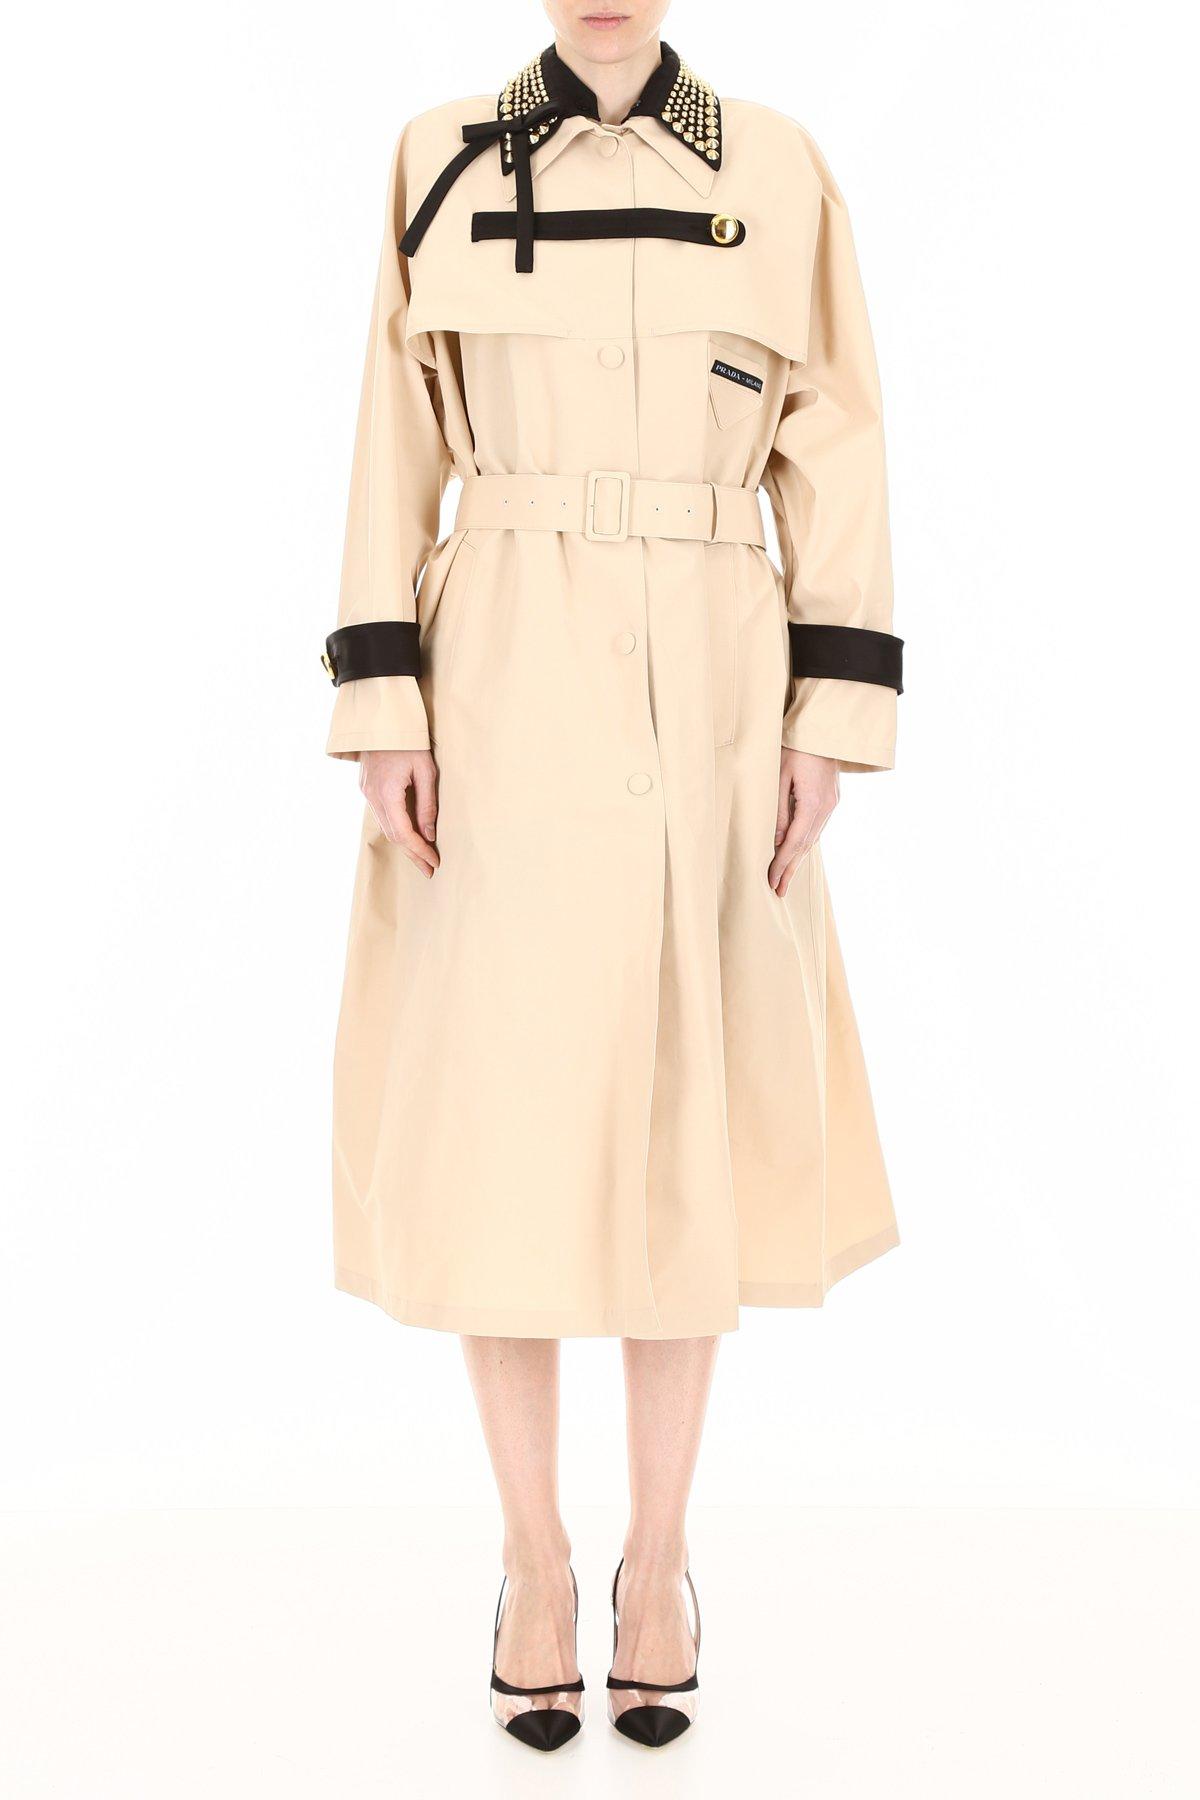 Prada Trench Coat With Studs in Natural | Lyst